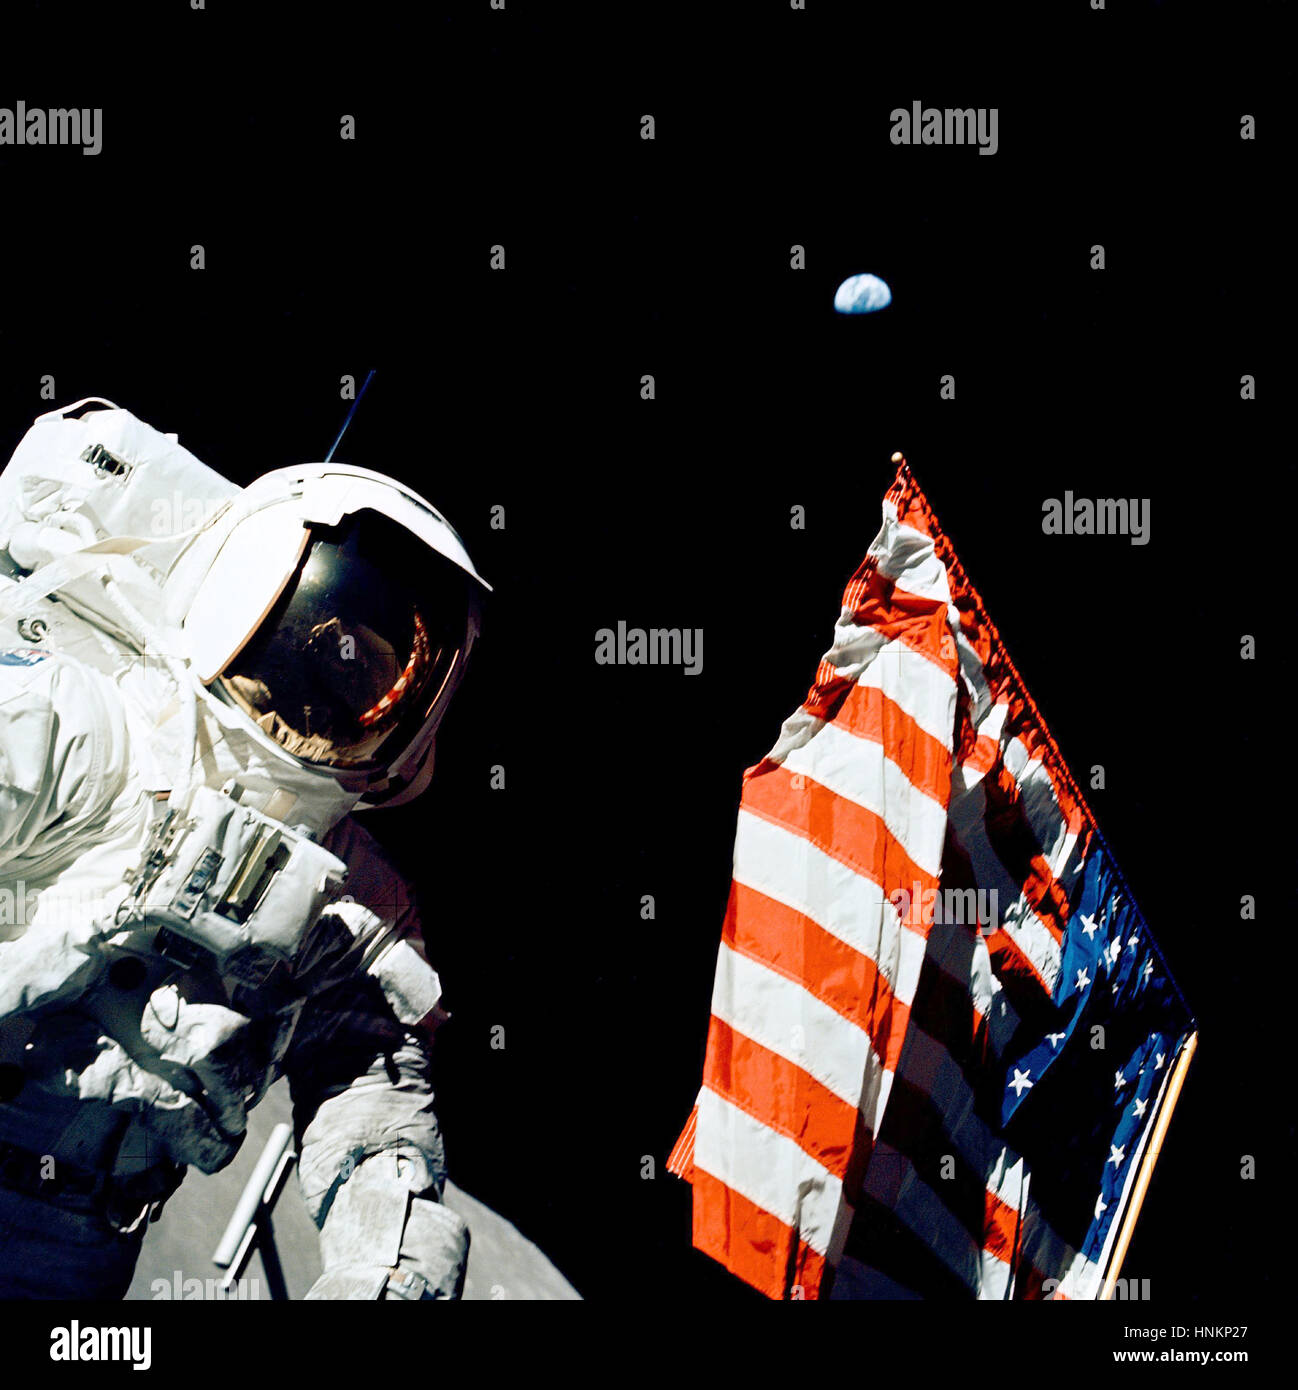 Scientist-astronaut Harrison H. Schmitt stands by the American flag during a moonwalk on the Apollo 17 mission. Home, that small dot in the blackness of space above the flag, is a quarter-million miles away.  Schmitt, Gene Cernan and Ron Evans made the Apollo program's final journey to the moon in December 1972.  Photo Credit: NASA Stock Photo